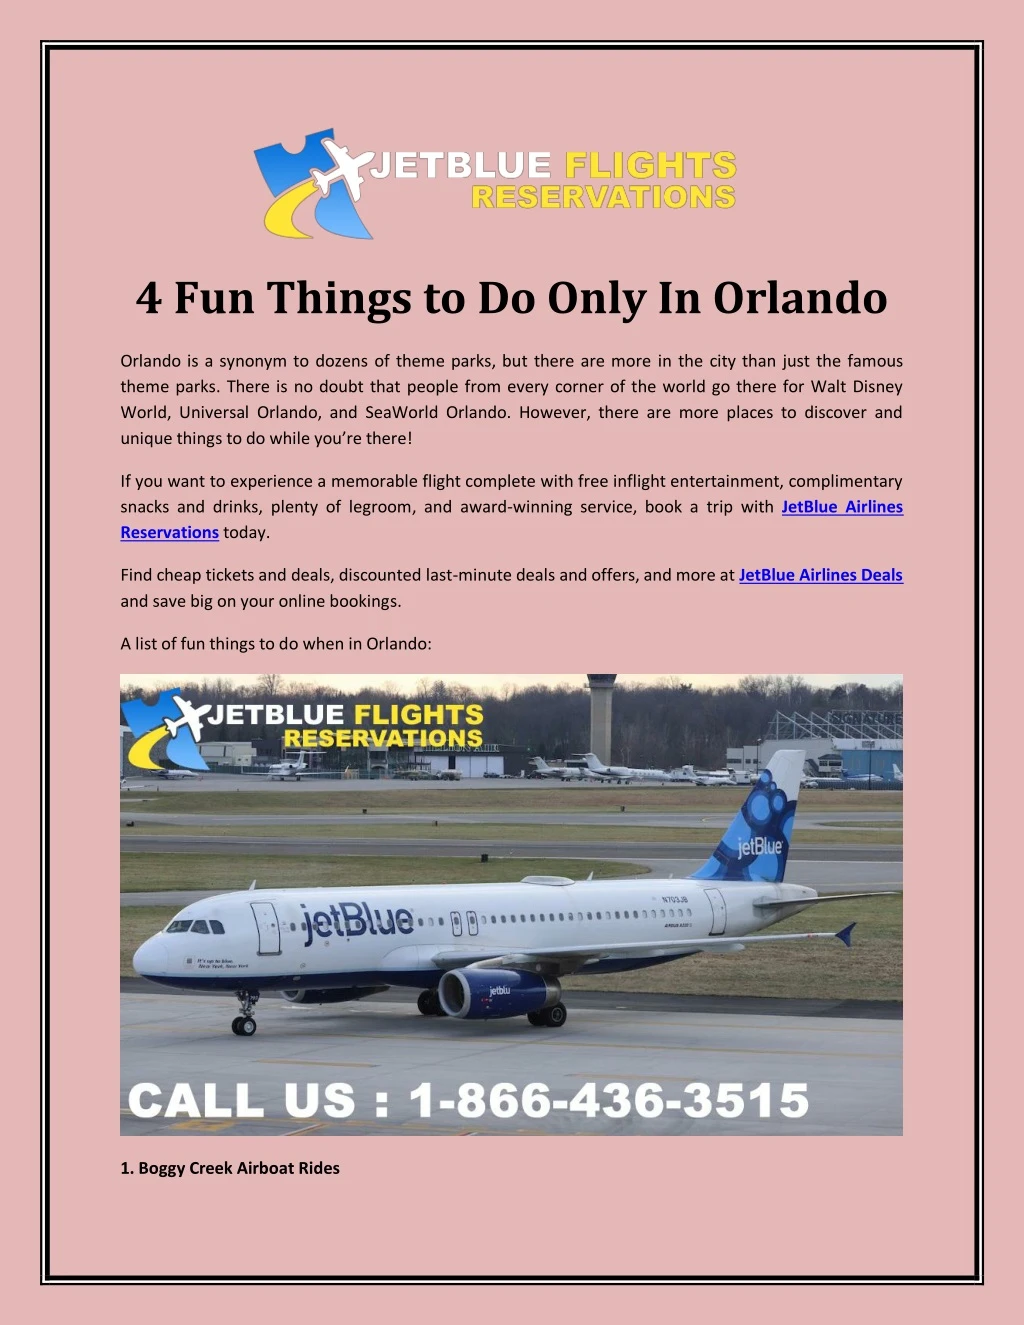 4 fun things to do only in orlando